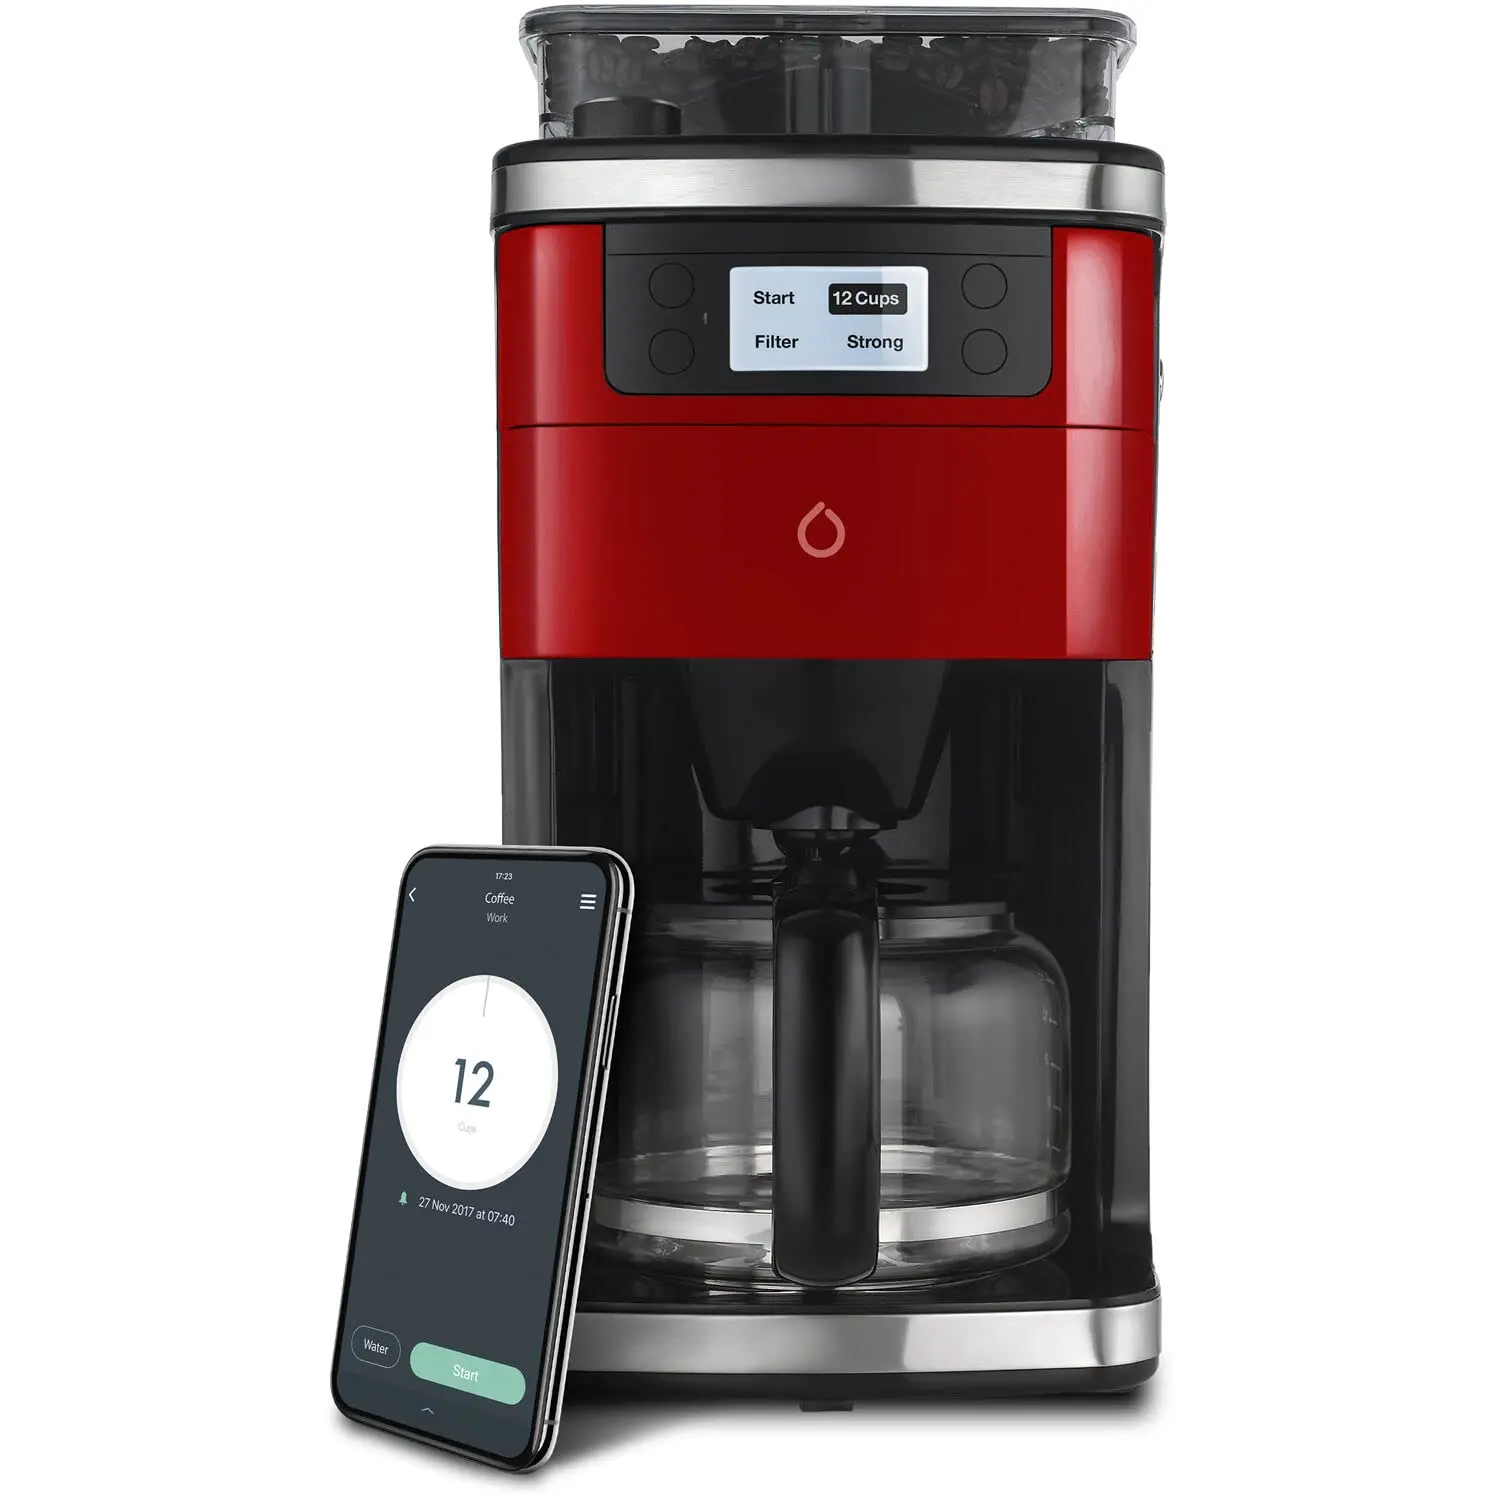 

Smarter Smart iCoffee Brew Coffee Maker in Red with Built-in Grinder App for Customized Coffee On Demand